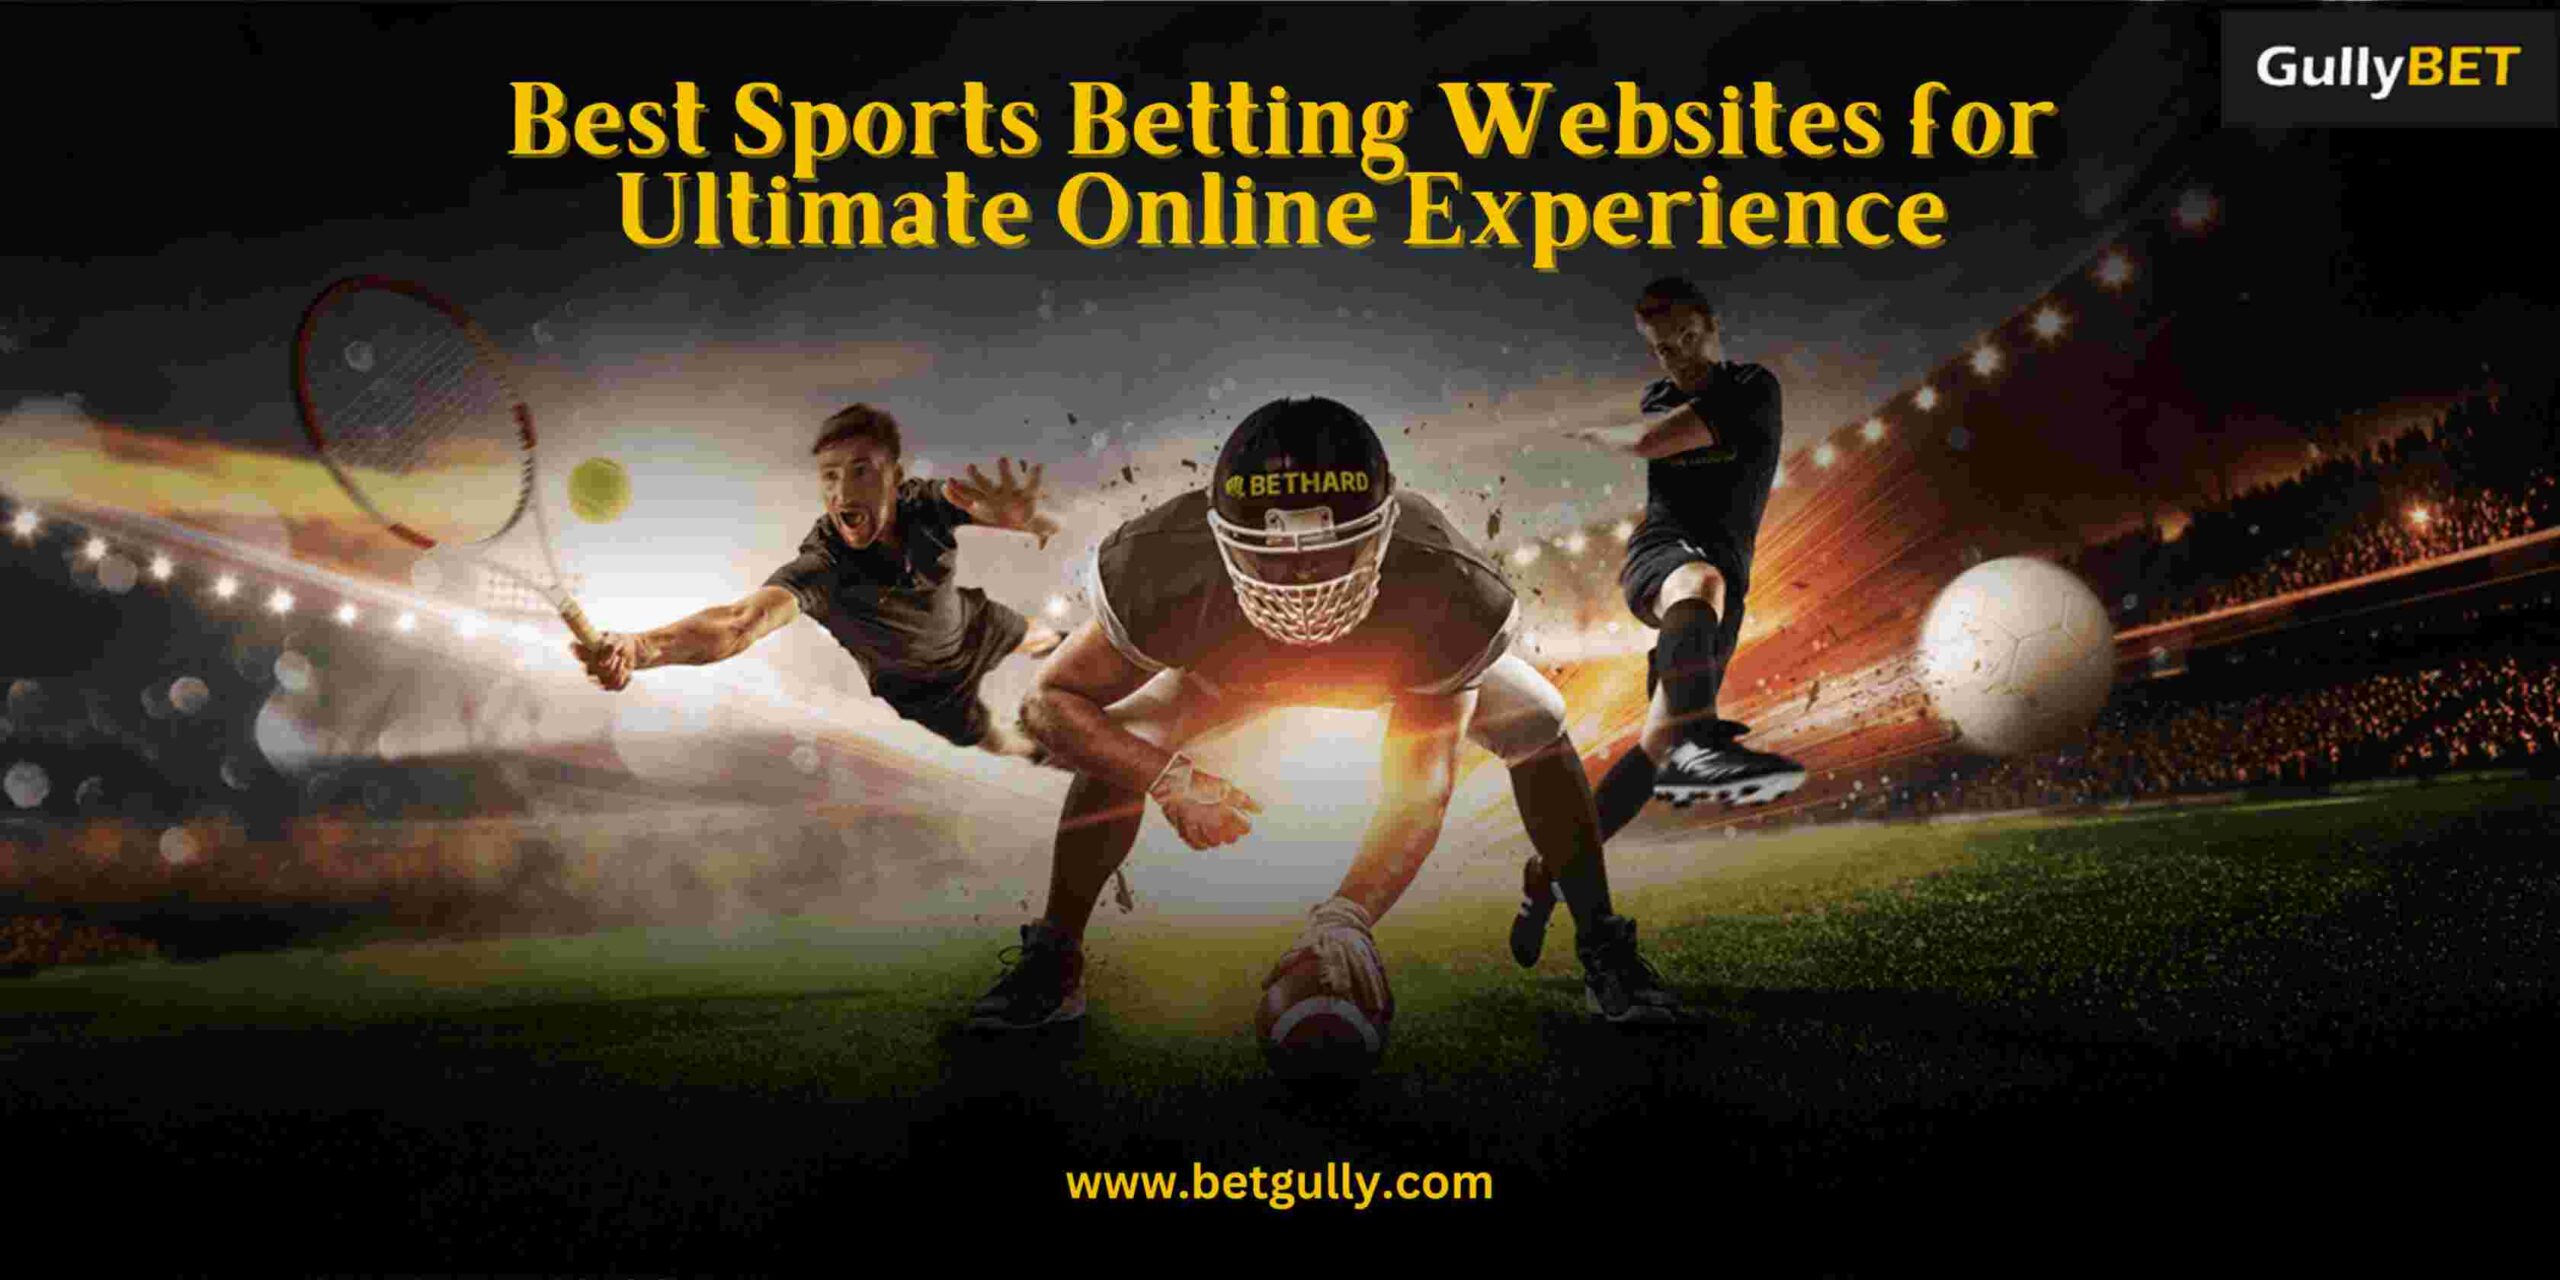 Best Sports Betting Websites for Ultimate Online Experience